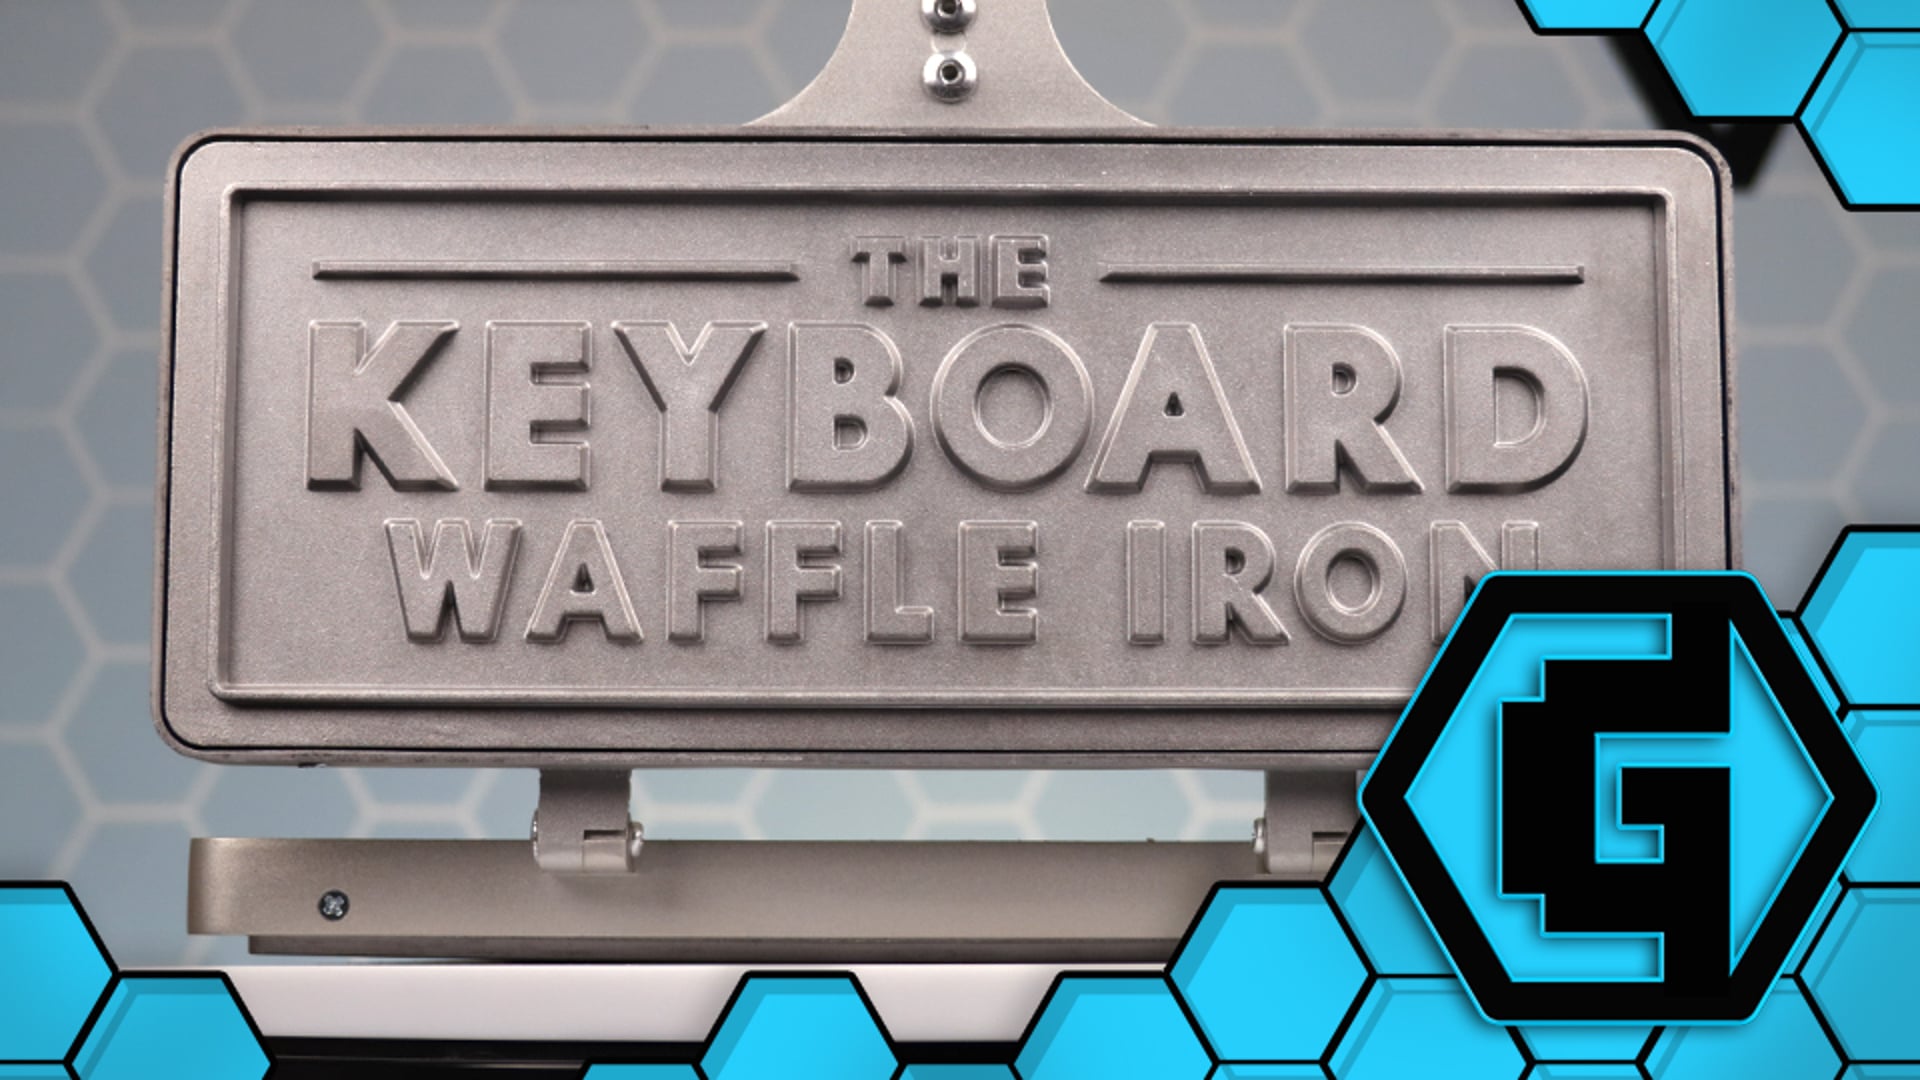 The Geekery View - The Keyboard Waffle Iron